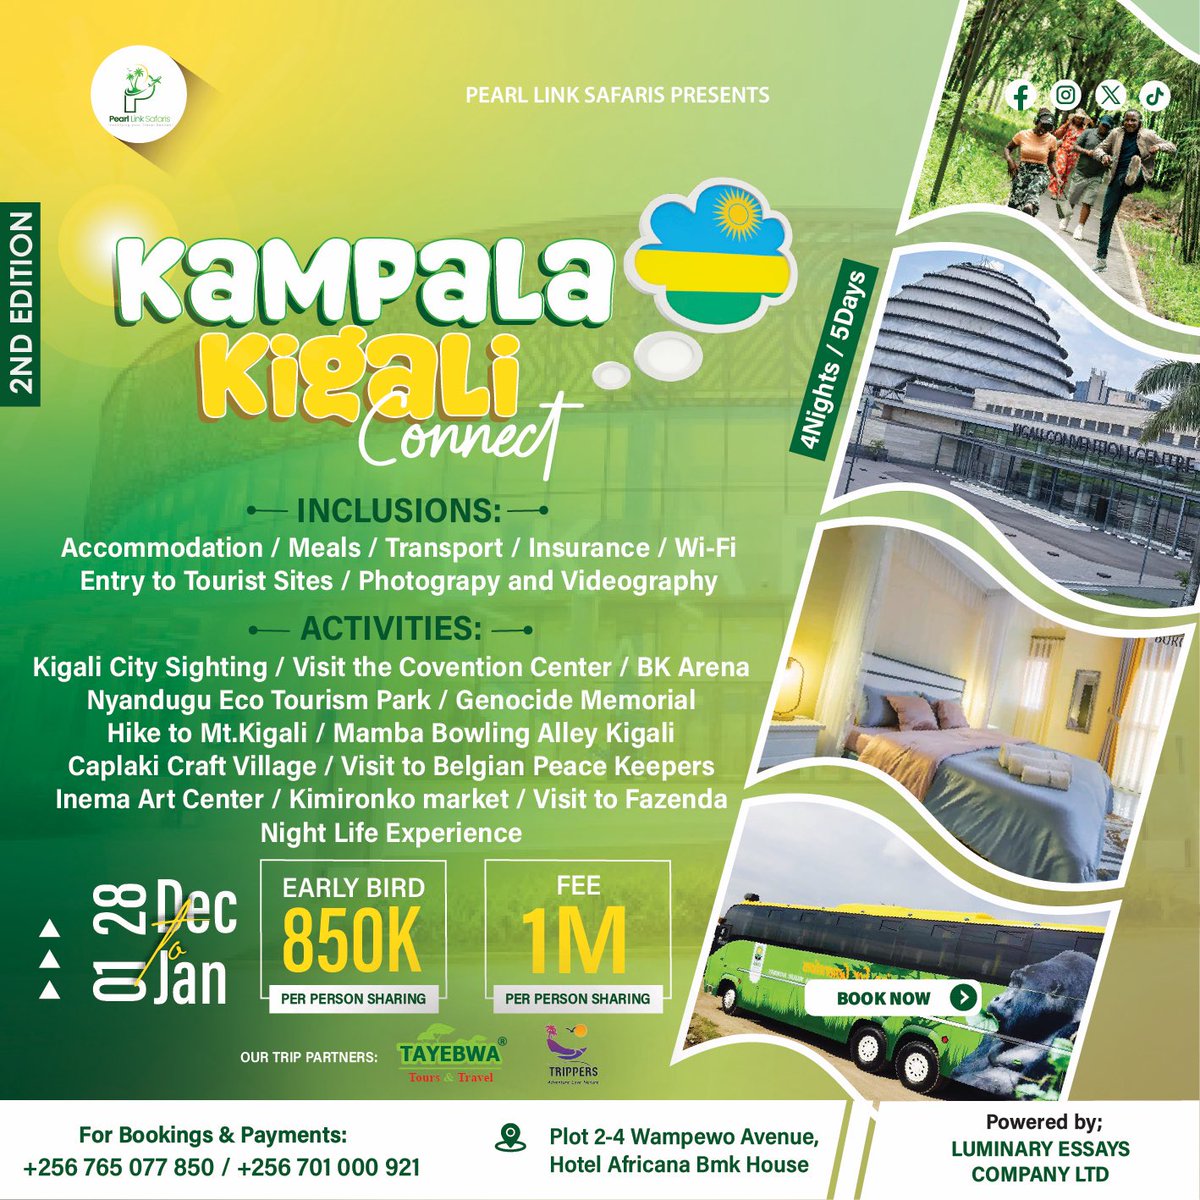 We are back again Kampala Kigali connect proudly brought you by @PLink_Safaris @Tayebwatours and @trippers_ug